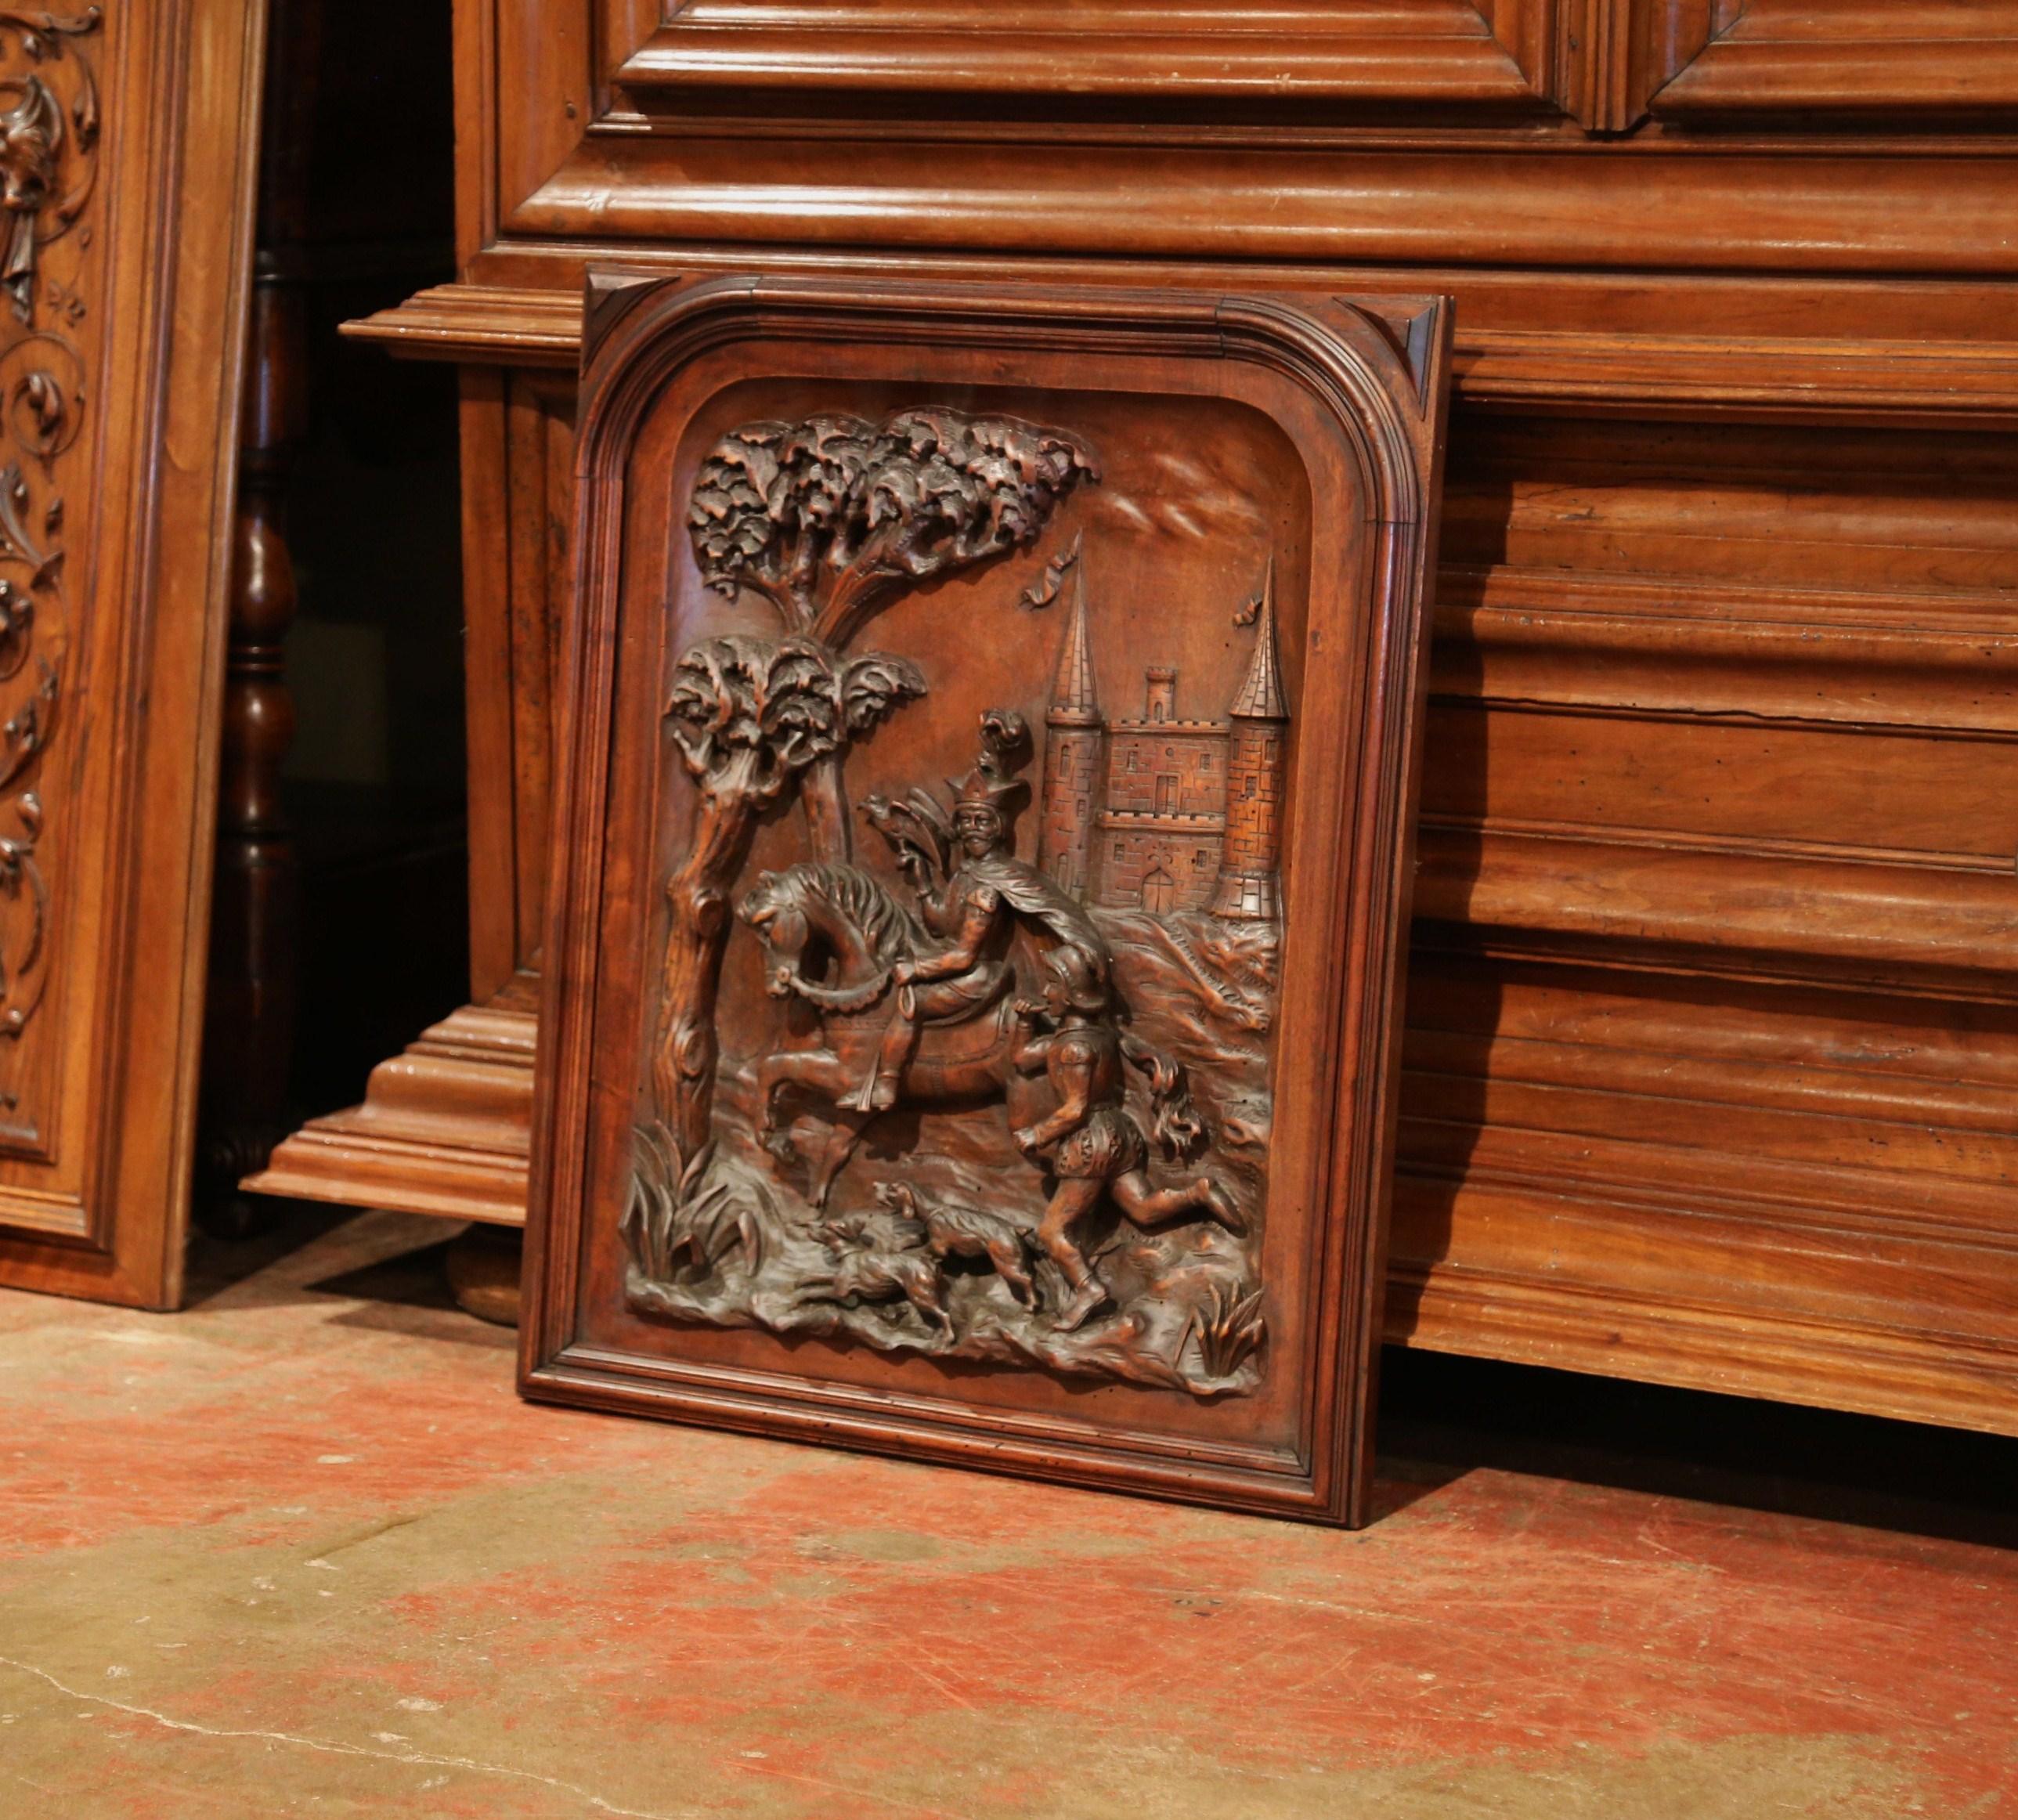 Decorate your office or game room with this elegant fruitwood wall panel; created in Southern France, circa 1870, the antique framed Renaissance piece features exquisite carvings in high relief including a soldier on his horse, two dogs and a page